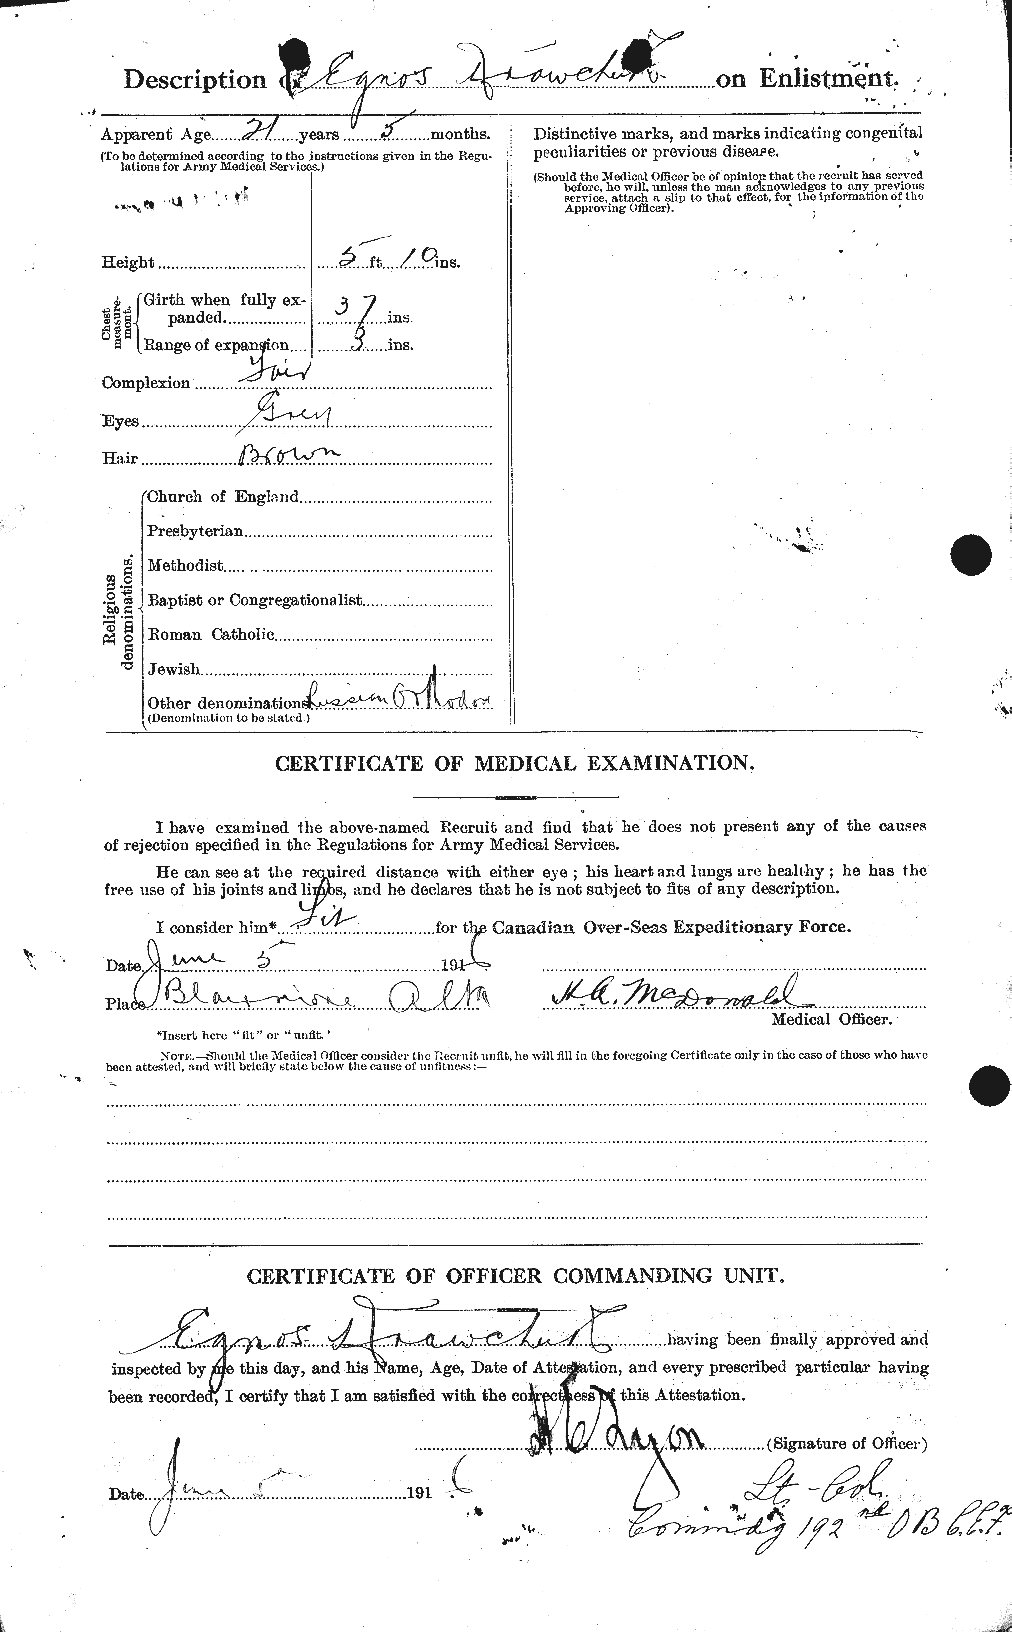 Personnel Records of the First World War - CEF 446173b